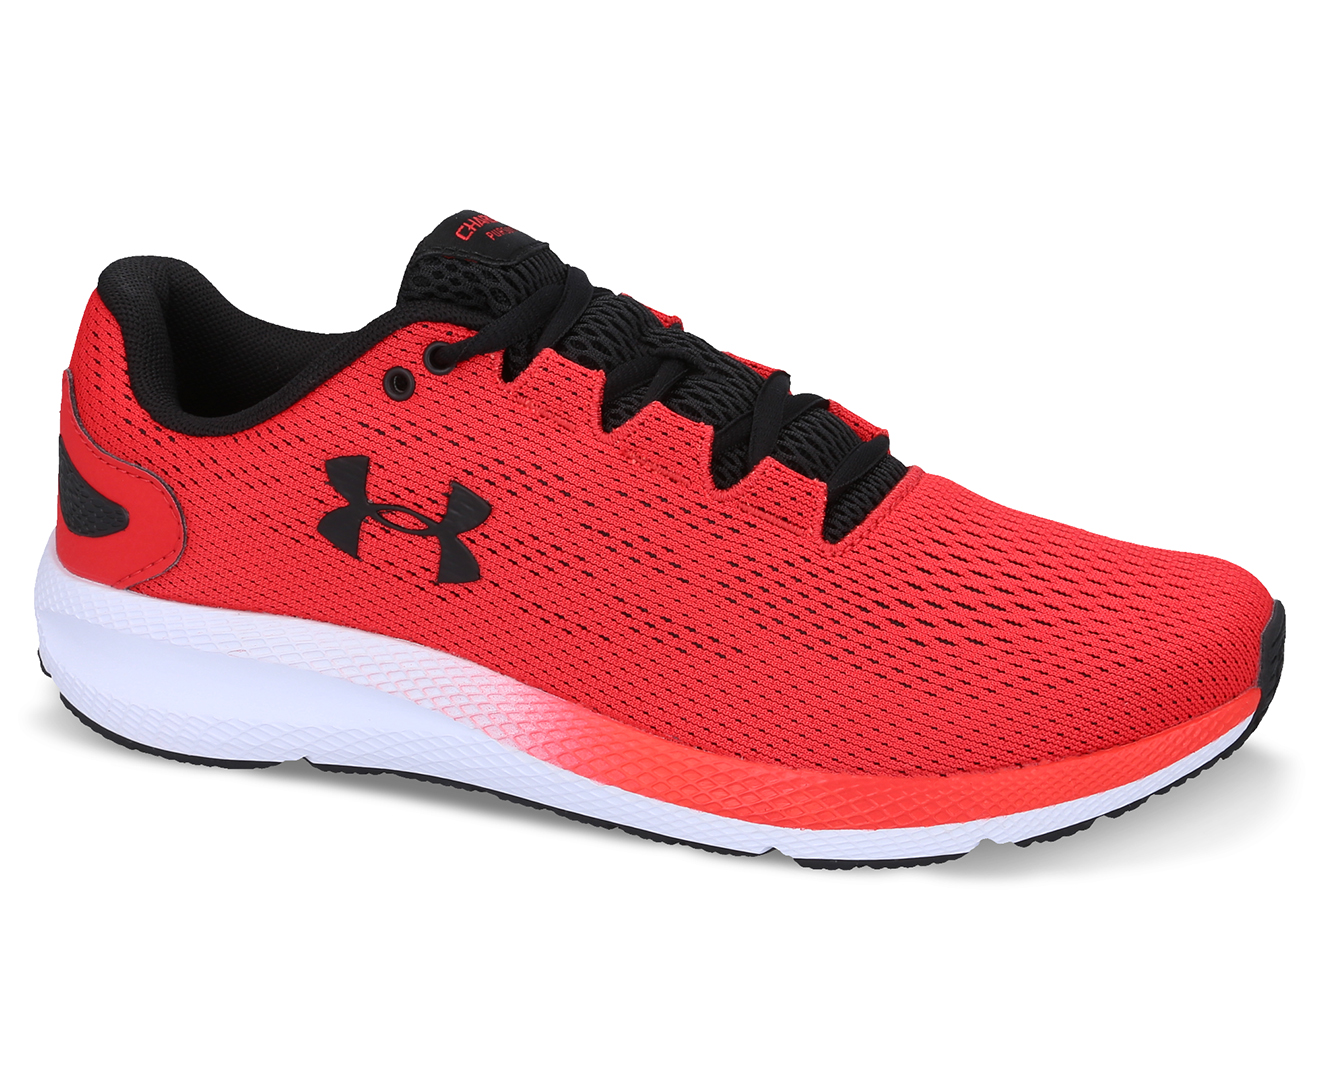 Under Armour Men's UA Charged Pursuit 2 Running Shoes - Red | Catch.com.au